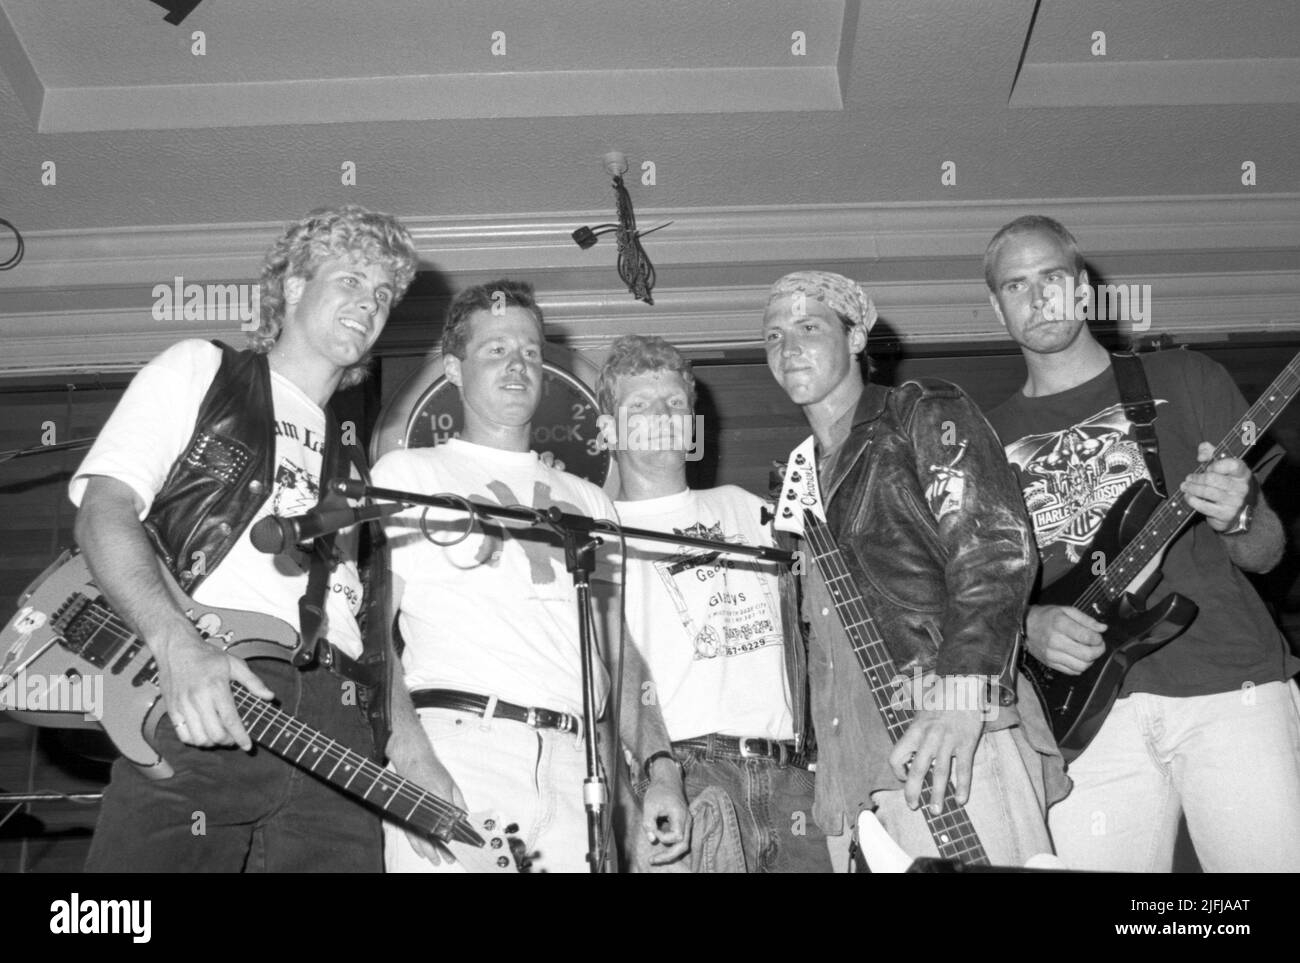 Tennis players including Jim Courier, Luke Jensen and Murphy Jensen at the end of a gig at the Hard Rock Cafe, London, UK in June 1991. Stock Photo